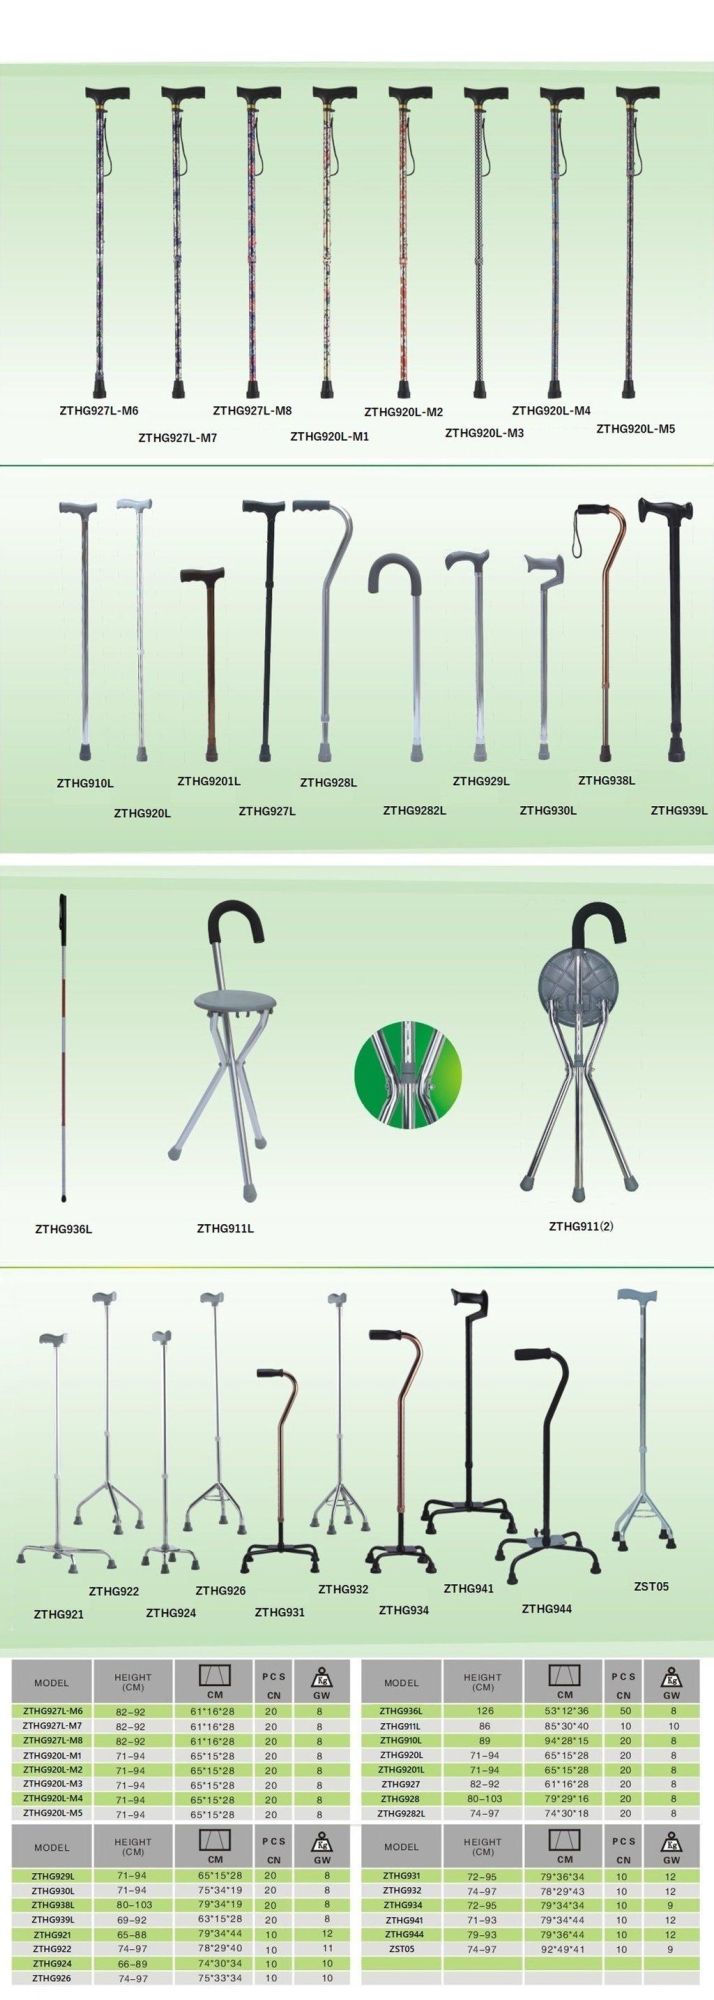 Disabled People Orthopedic Crutch Aluminum Lightweight Strong Outdoor Safety Stable Adjustable Height Walking Stick Foldable Rehabilitation Product